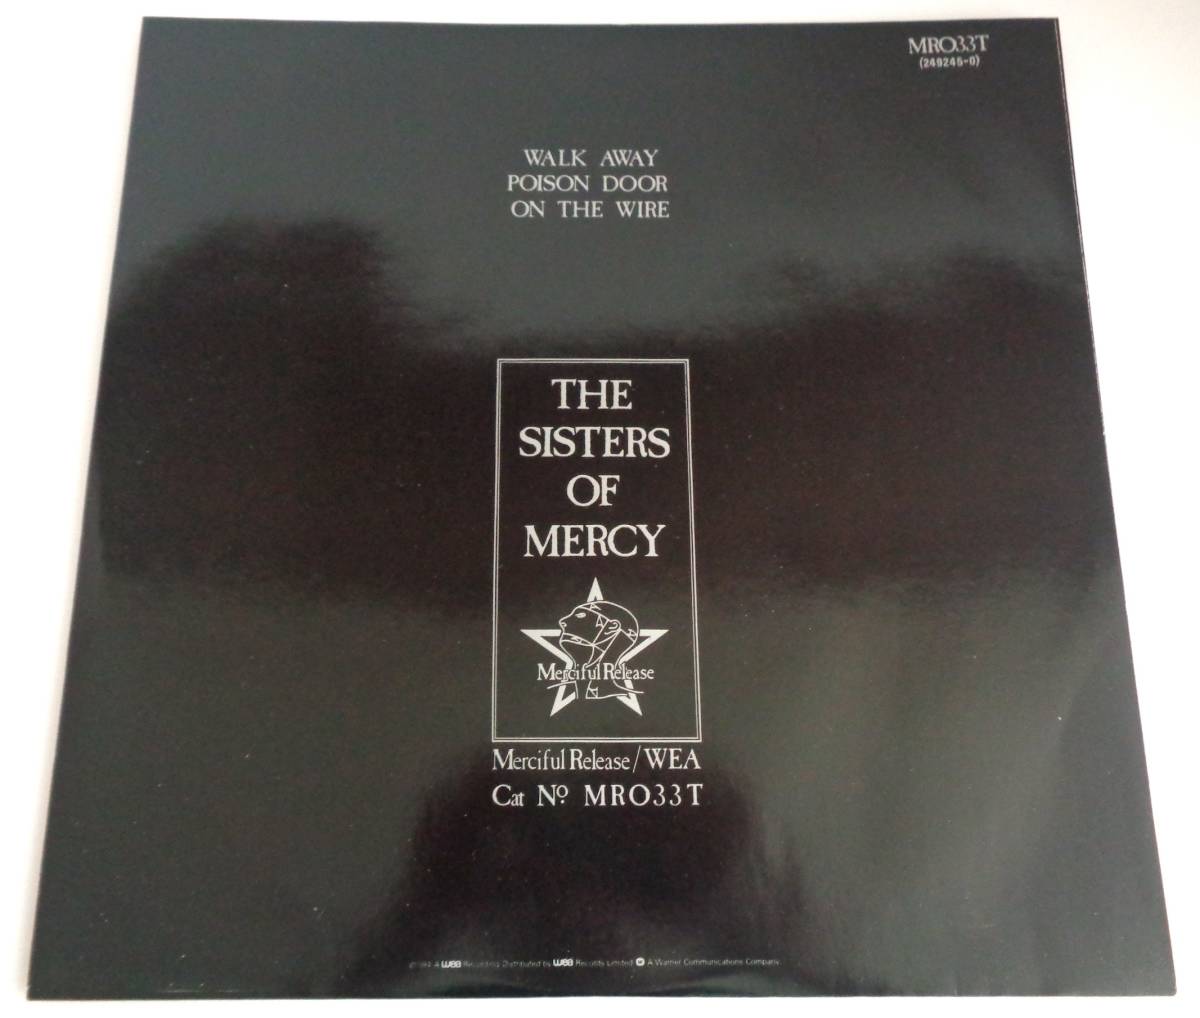 UK盤12inc Limited Edition　The Sisters Of Mercy　Walk Away　free 7inc flexi disc付　1984年　全4曲　goth　ゴシック・ロック　_画像2